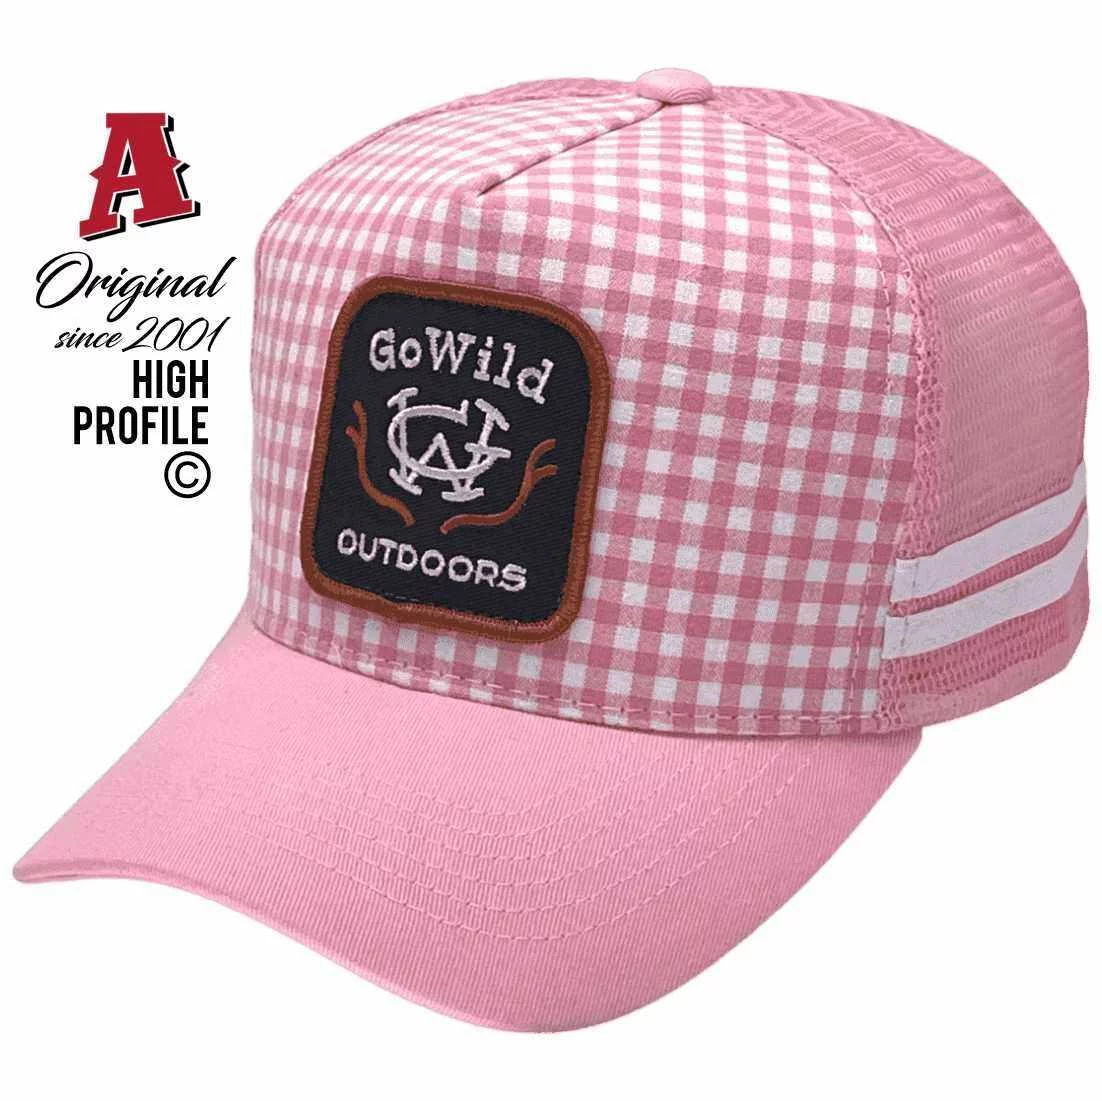 Go Wild Outdoors Charters Towers Qld Midrange Aussie Trucker Hats with Australian HeadFit Crown & 2 SideBands Gingham Pink Snapback